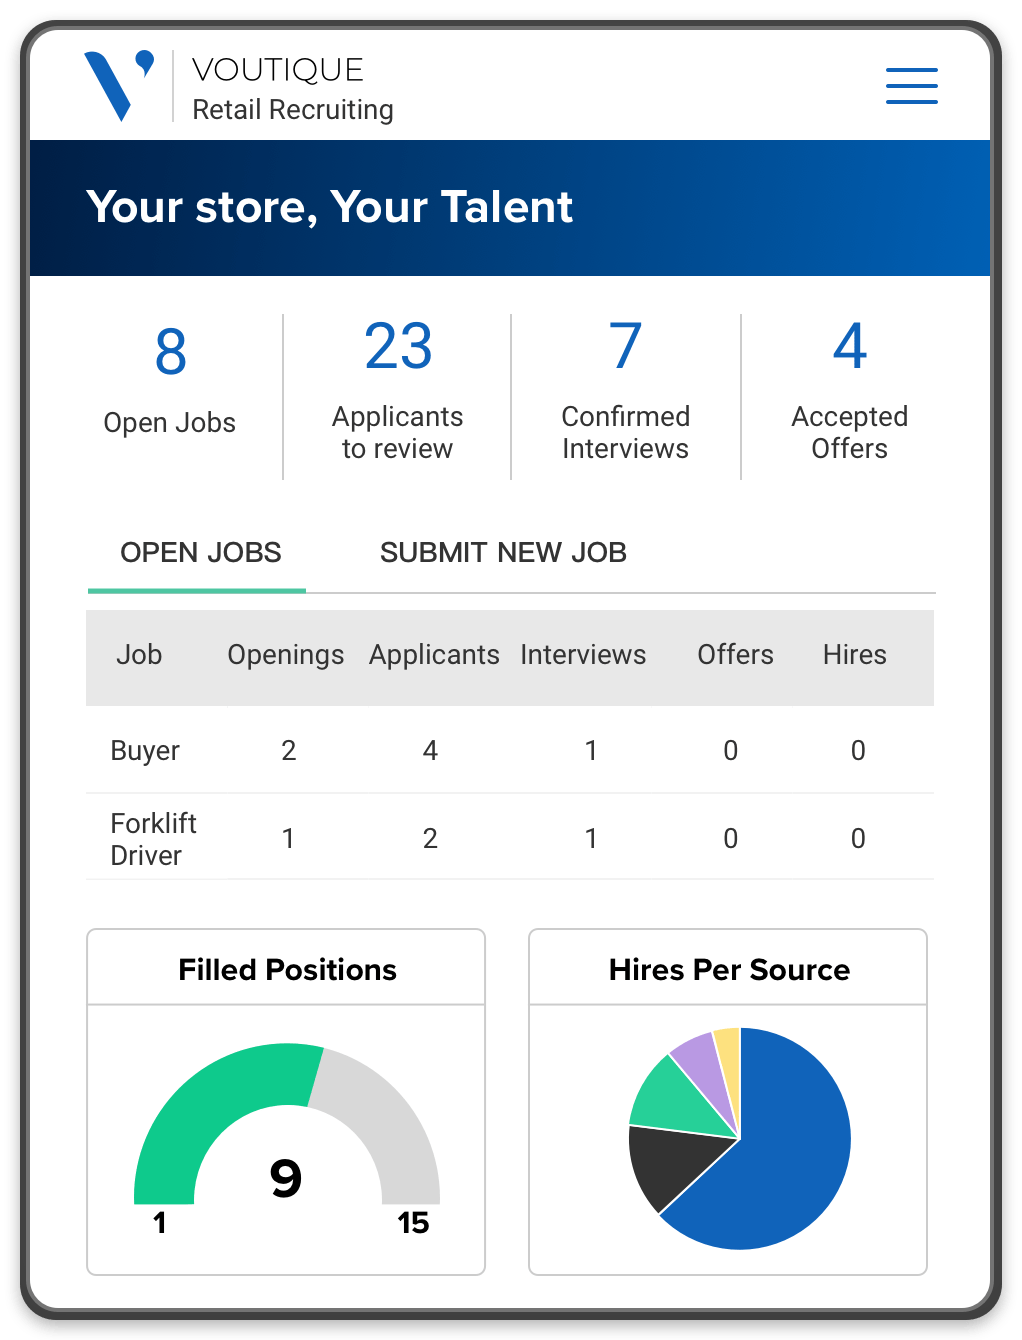 A mobile in-store portal, displaying metrics and graphics about open jobs, pending tasks, filled positions and hires per source.